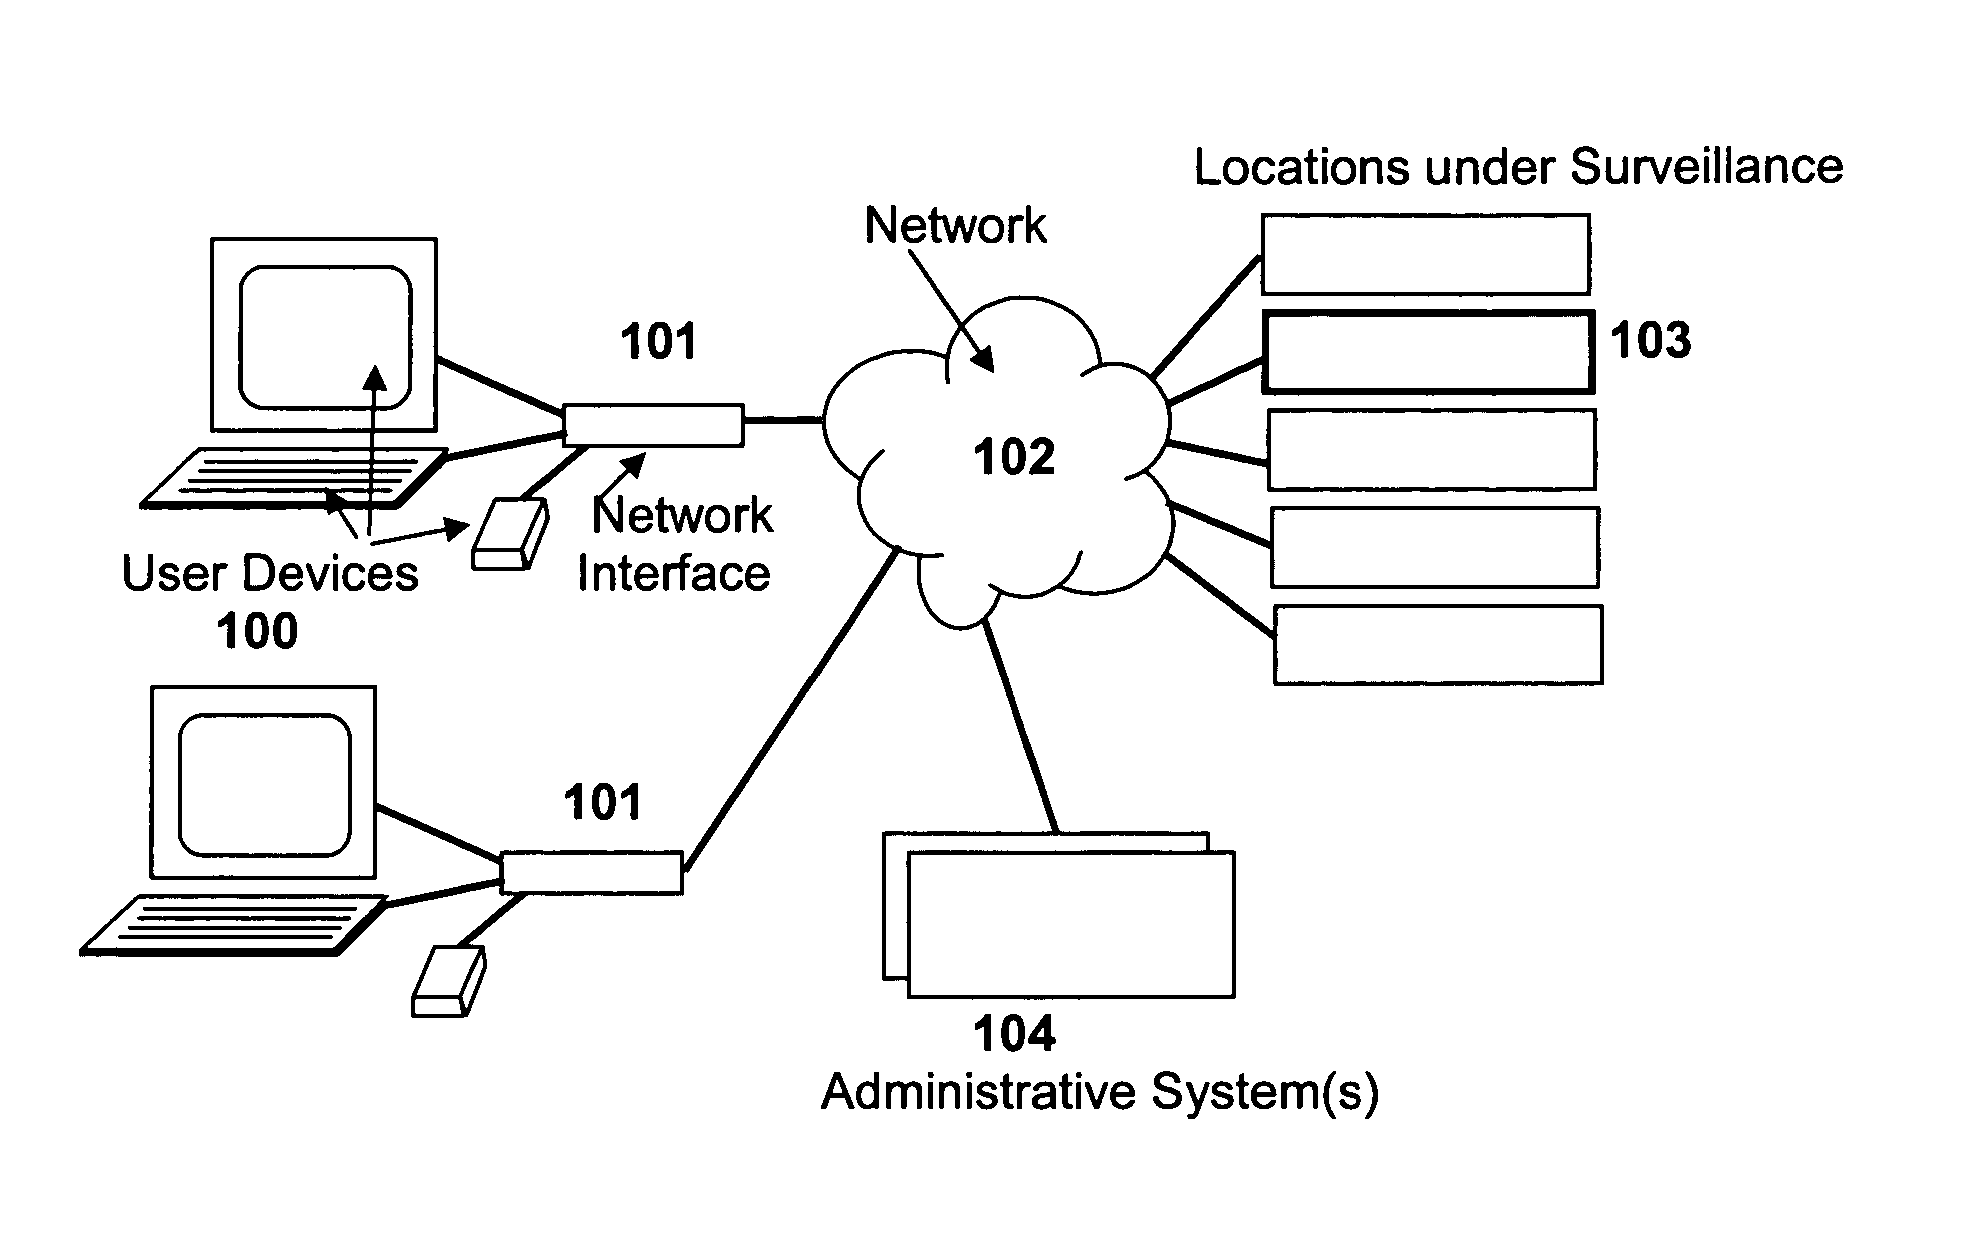 Voice remote command and control of a mapping security system